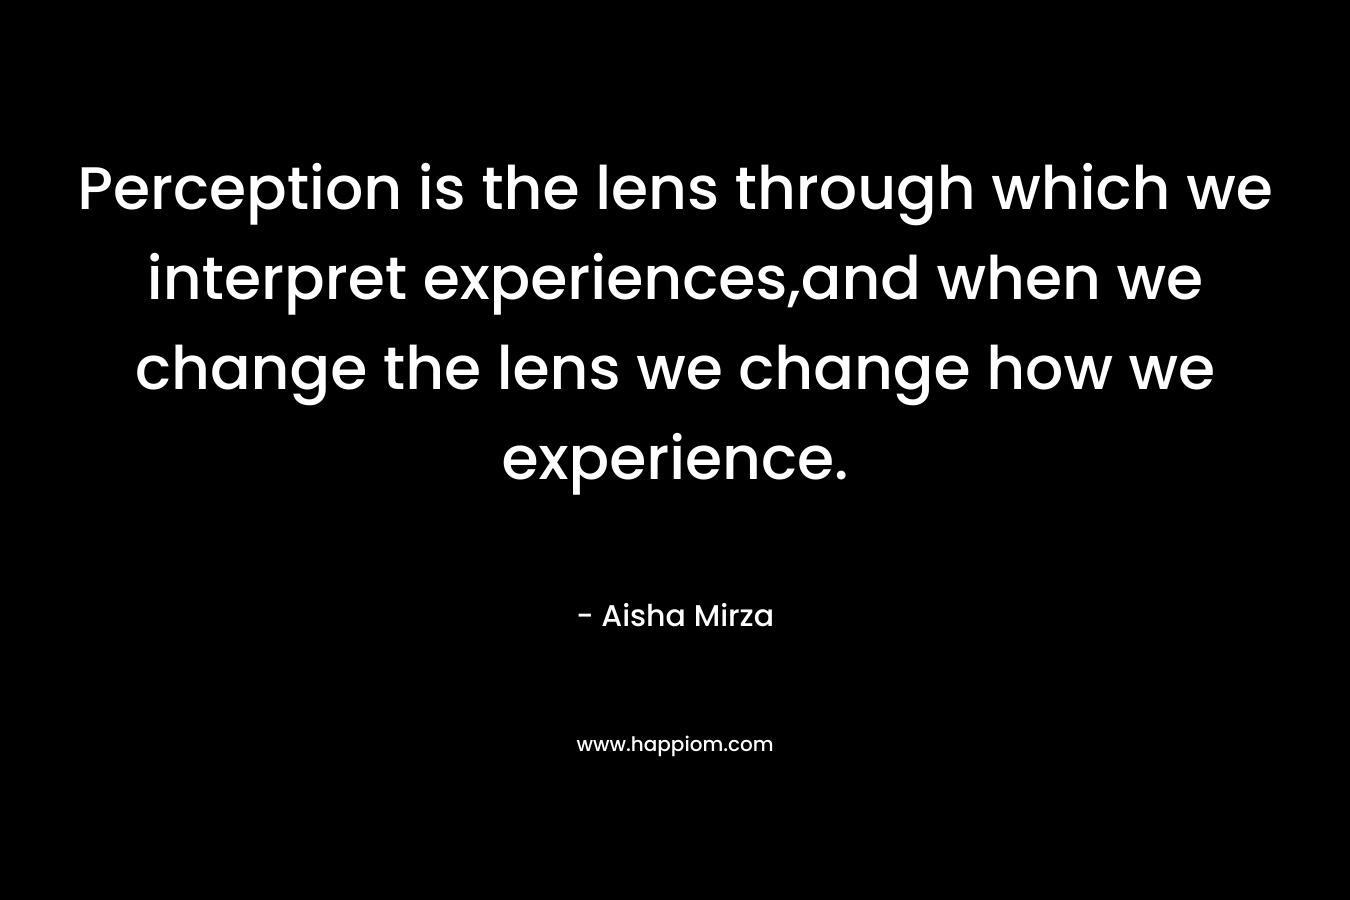 Perception is the lens through which we interpret experiences,and when we change the lens we change how we experience. – Aisha Mirza